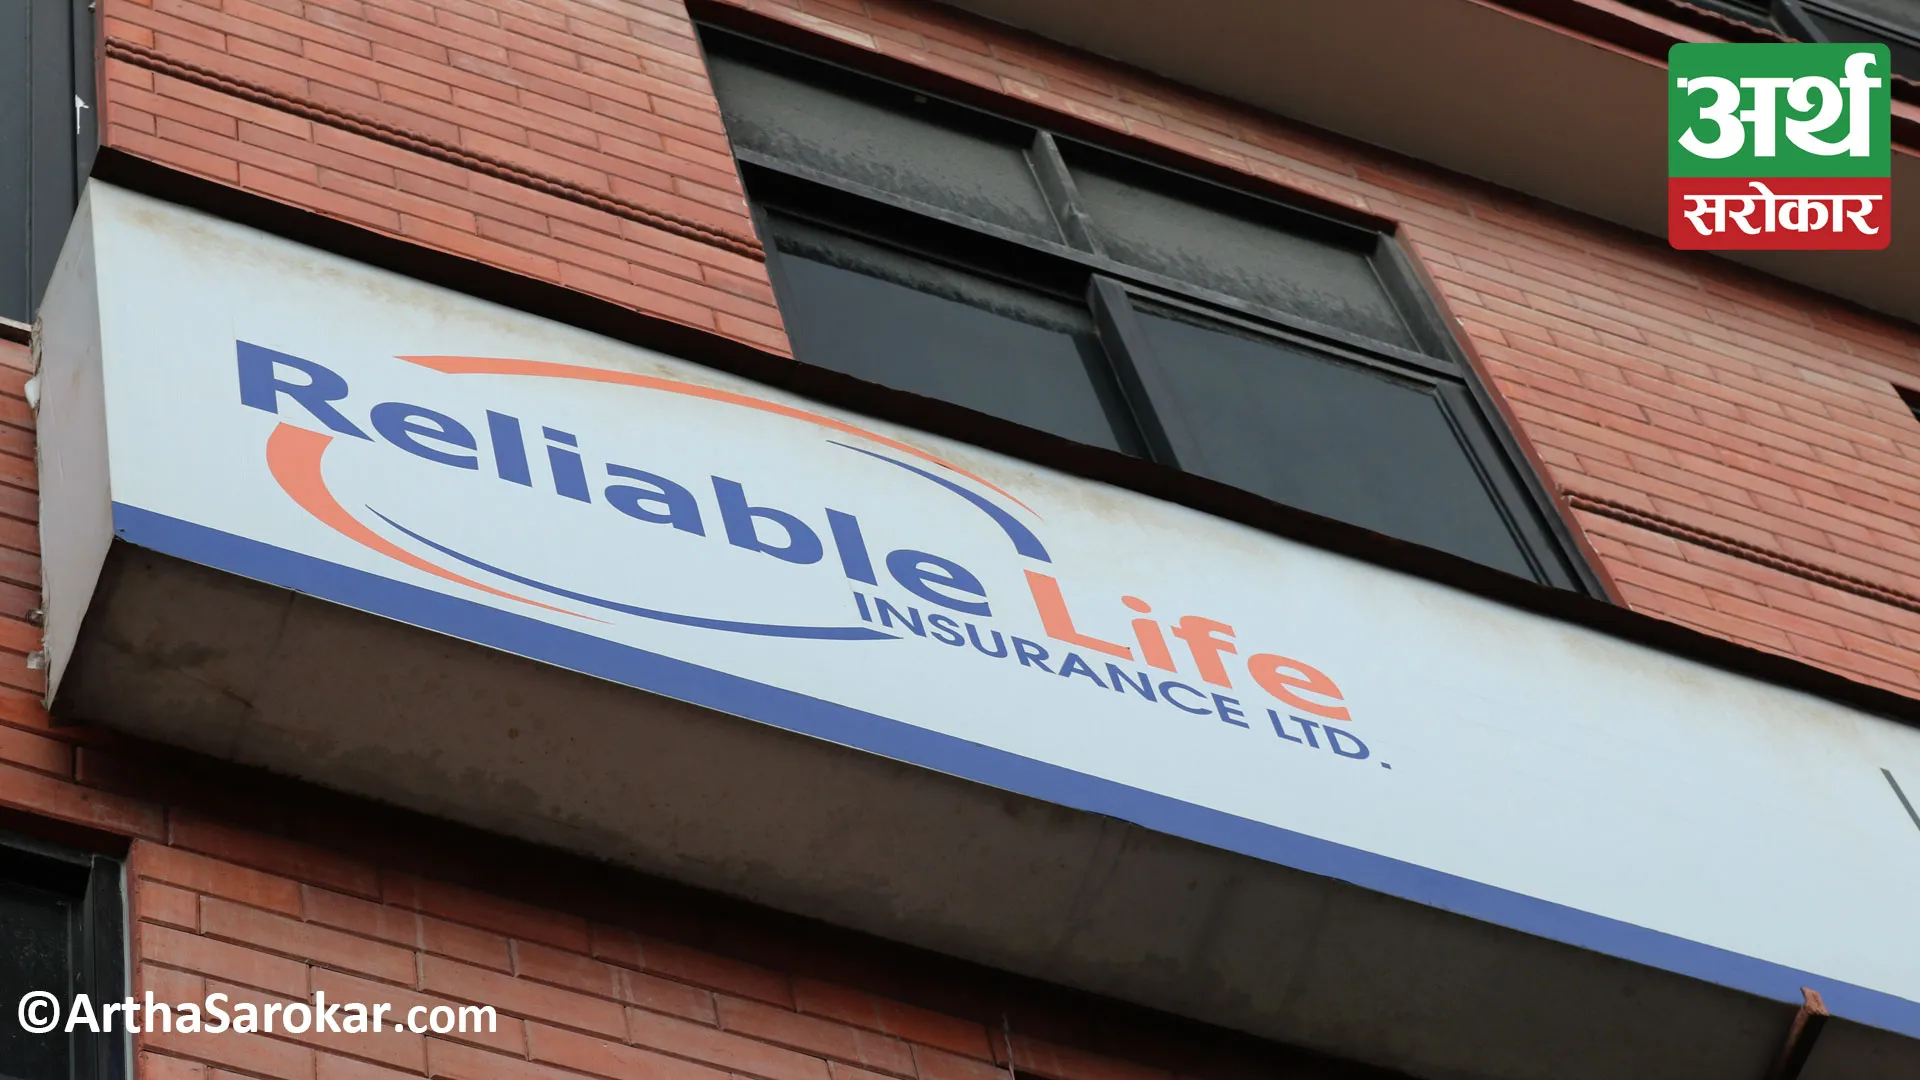 Reliable Nepal Life Insurance announced Dividend